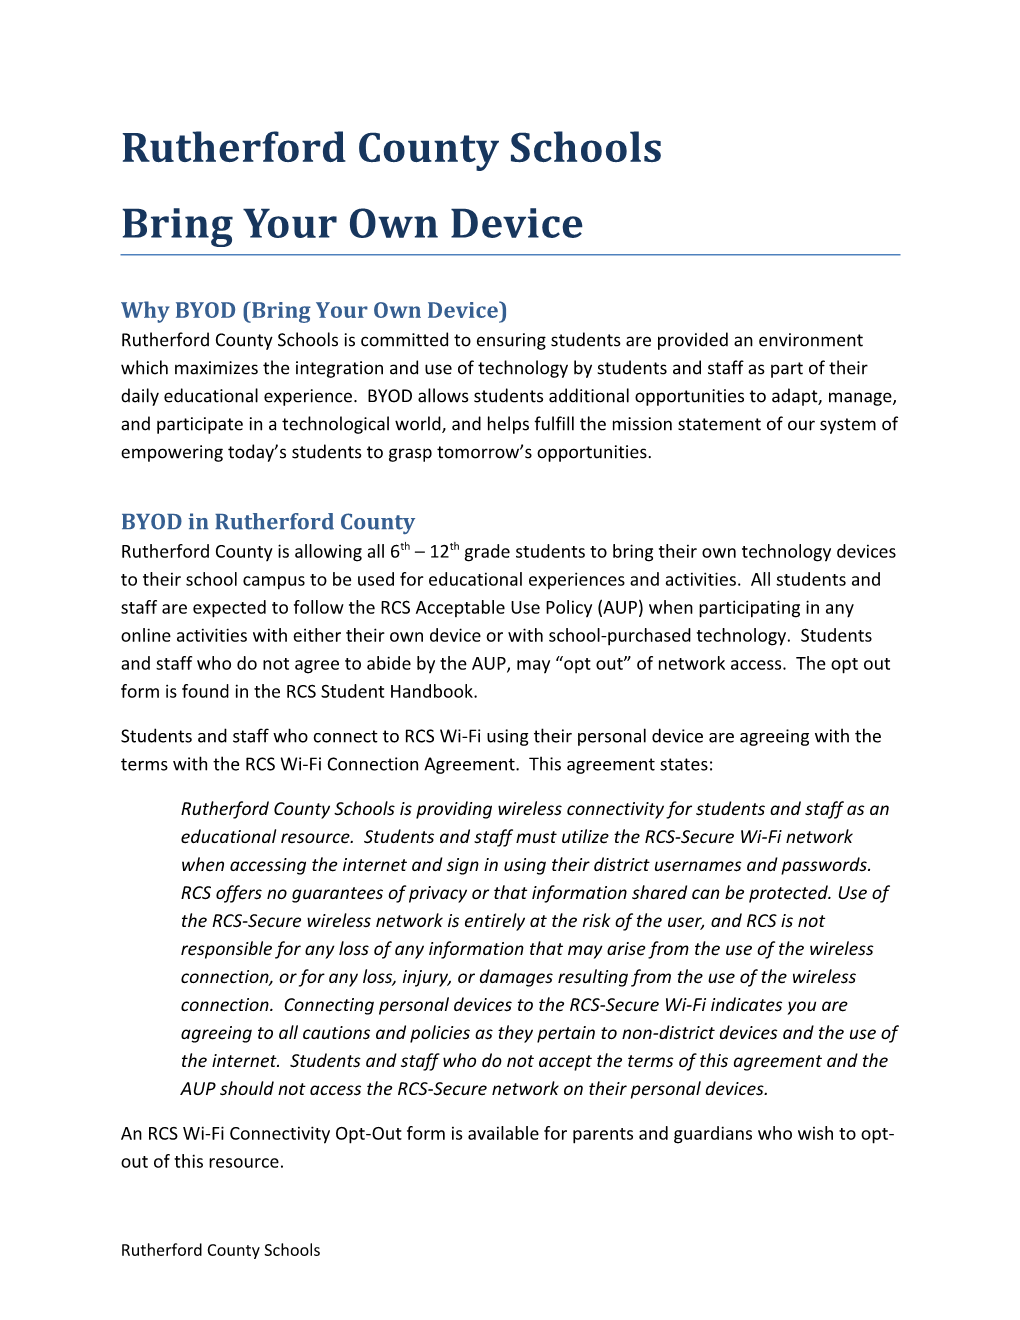 Why BYOD (Bring Your Own Device)